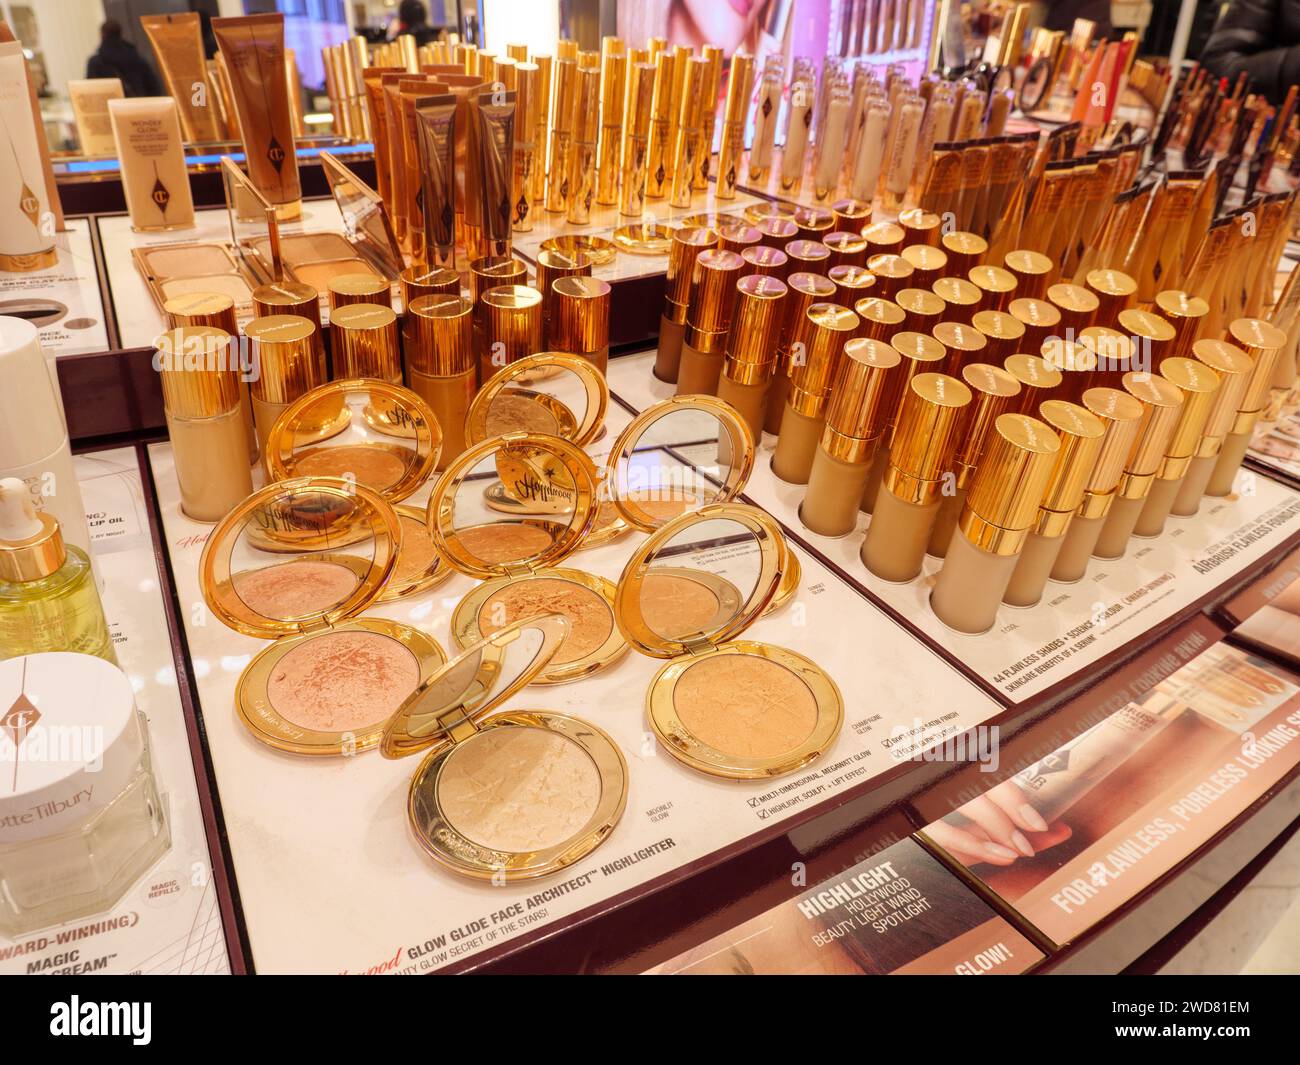 Beauty products and makeup on the cosmetics counter of Charlotte Tilbury concession at Selfridges department store, London, UK Stock Photo